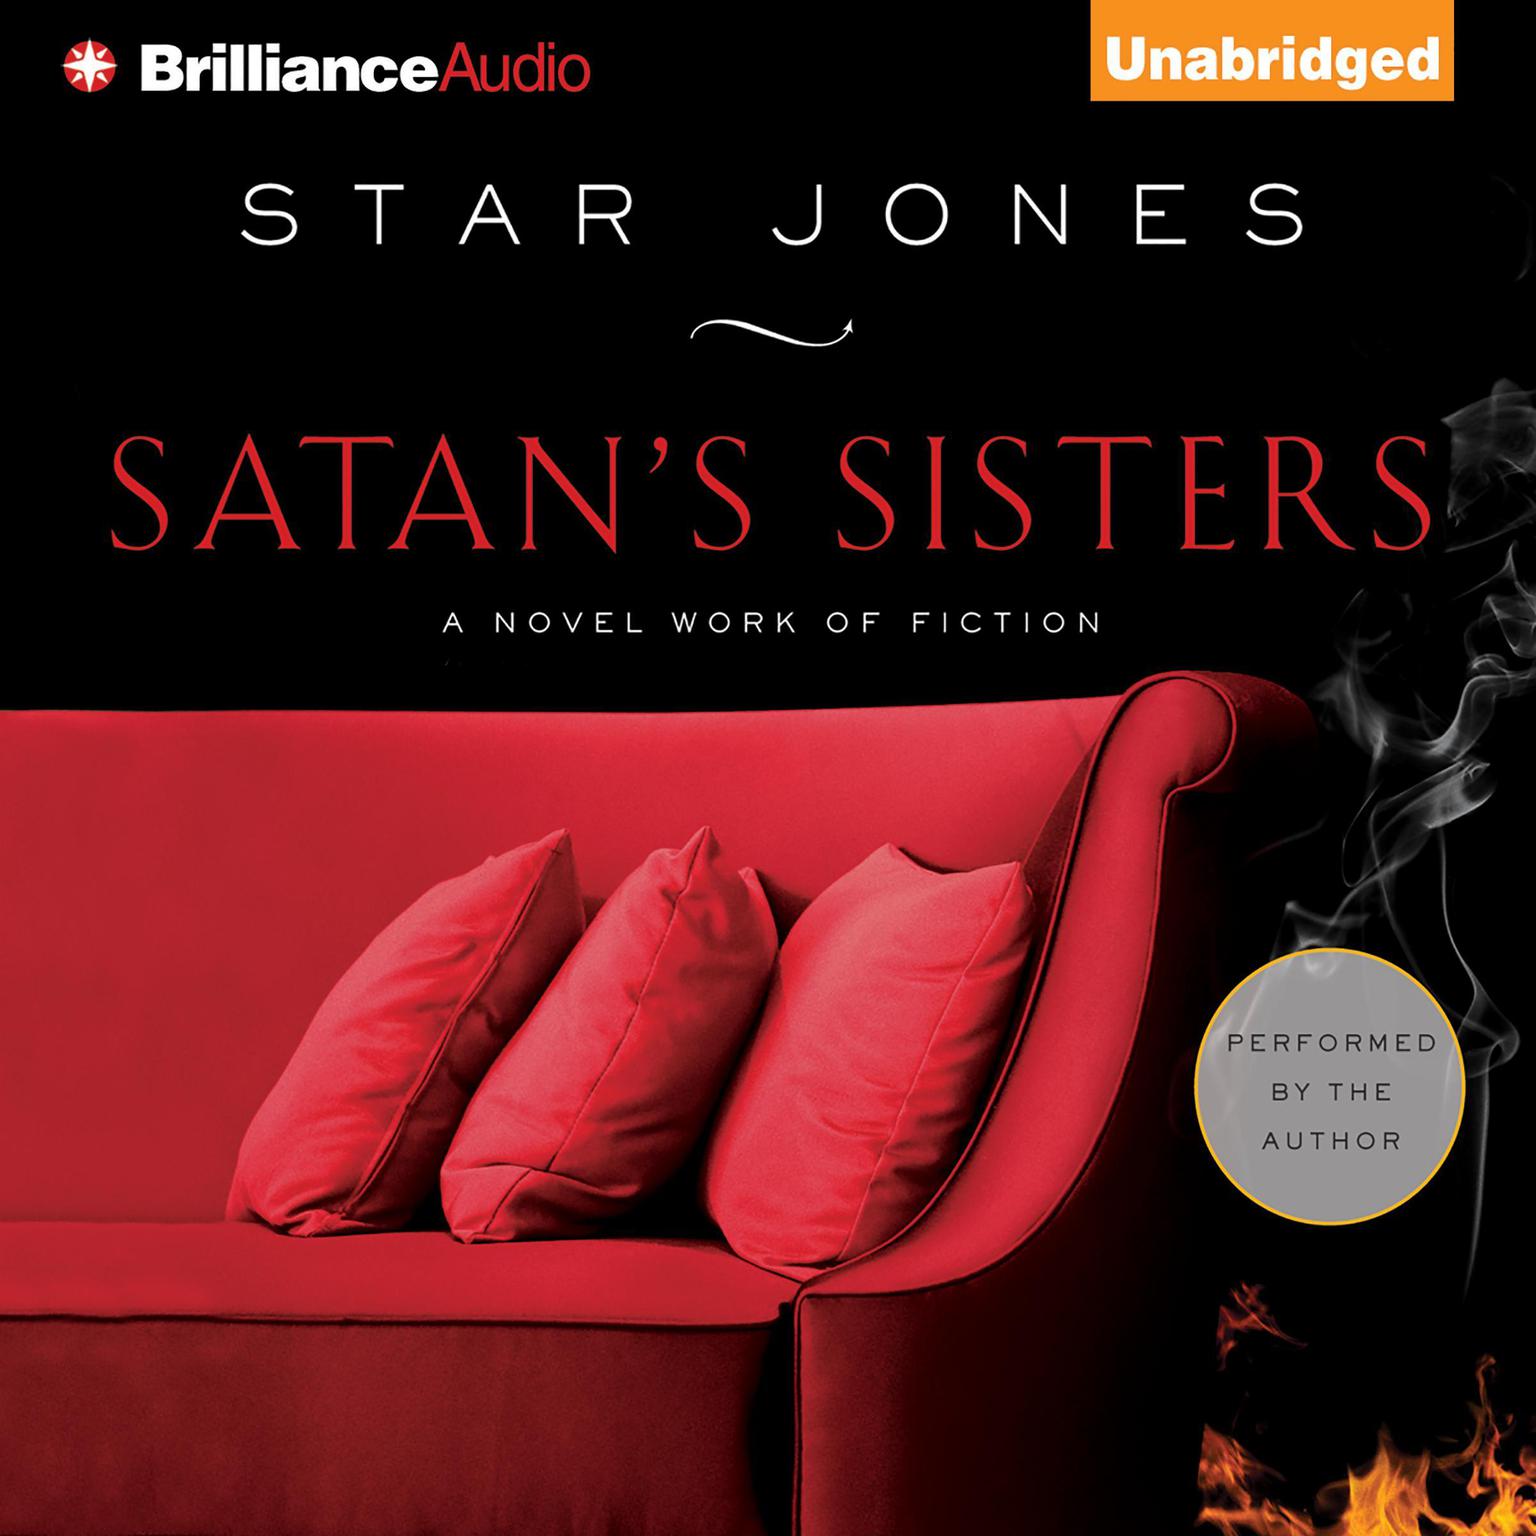 Satans Sisters: A Novel Work of Fiction Audiobook, by Star Jones